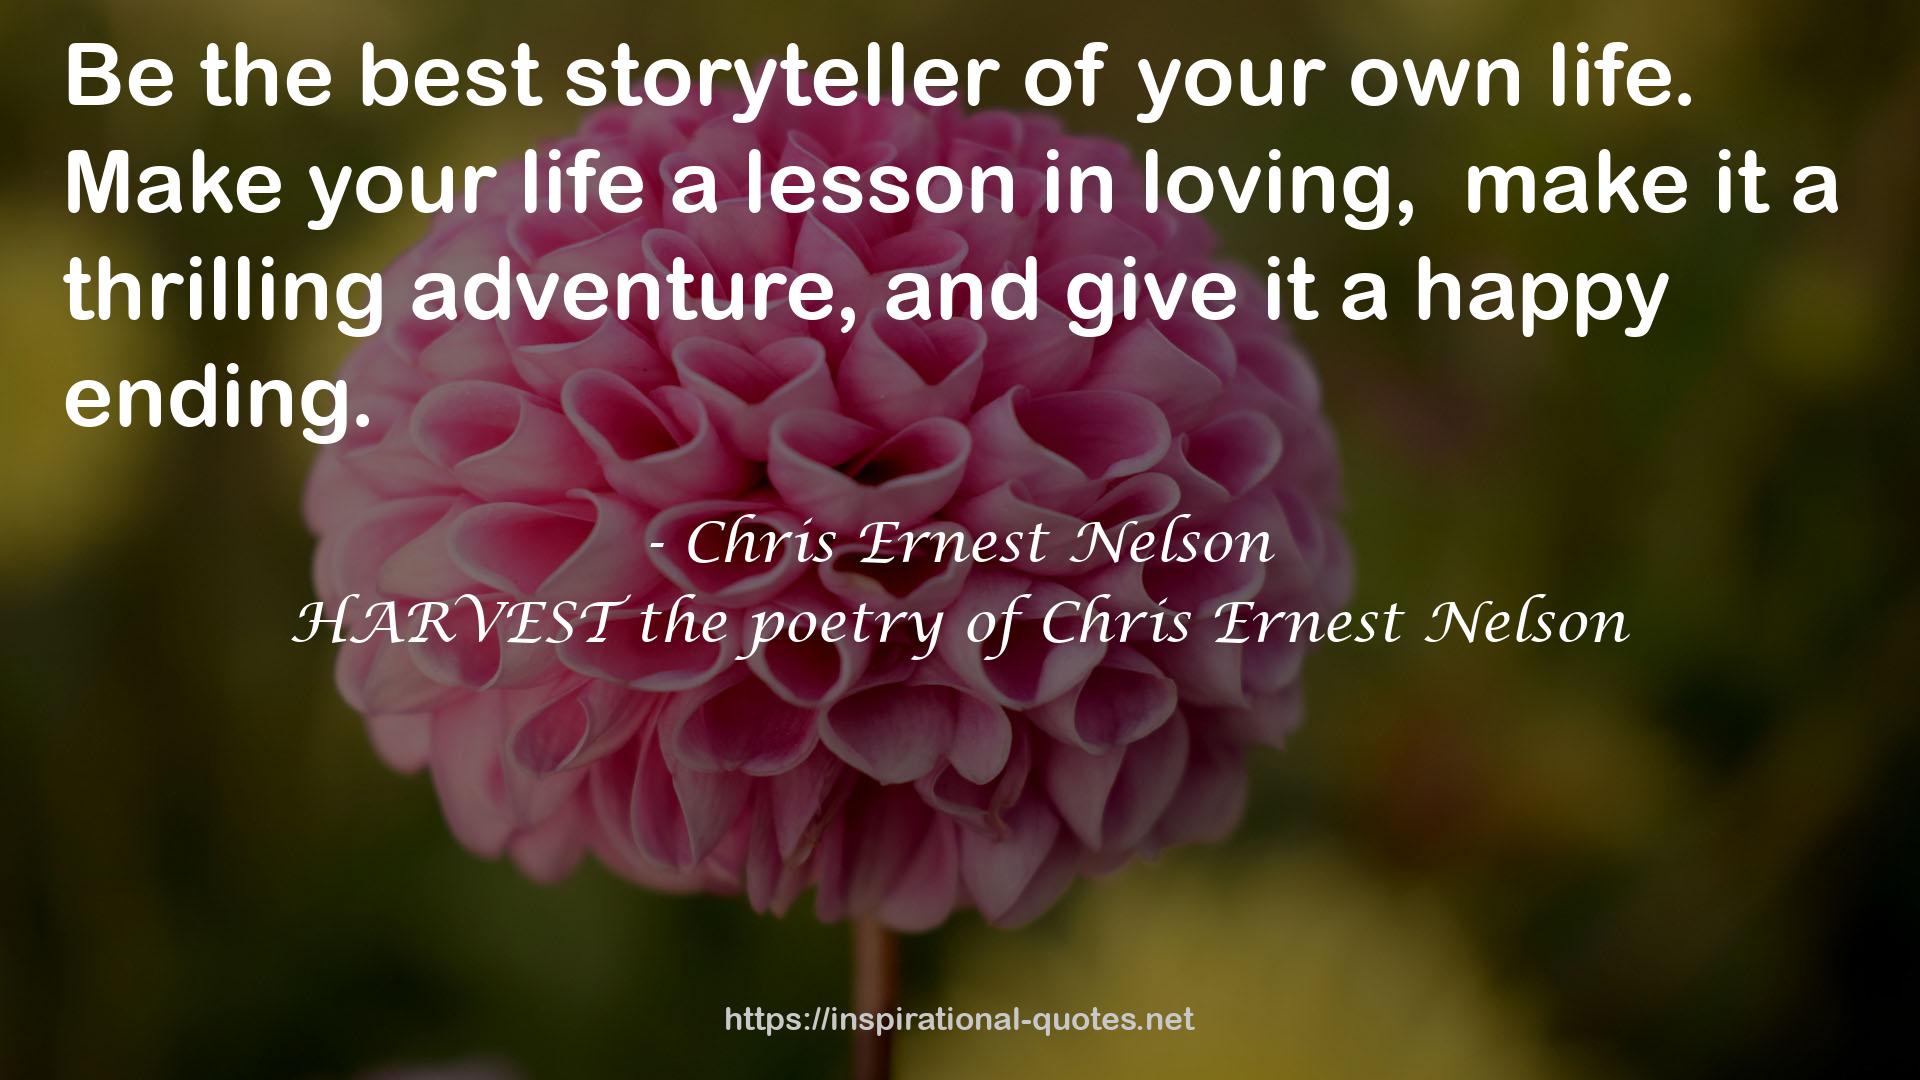 HARVEST the poetry of Chris Ernest Nelson QUOTES